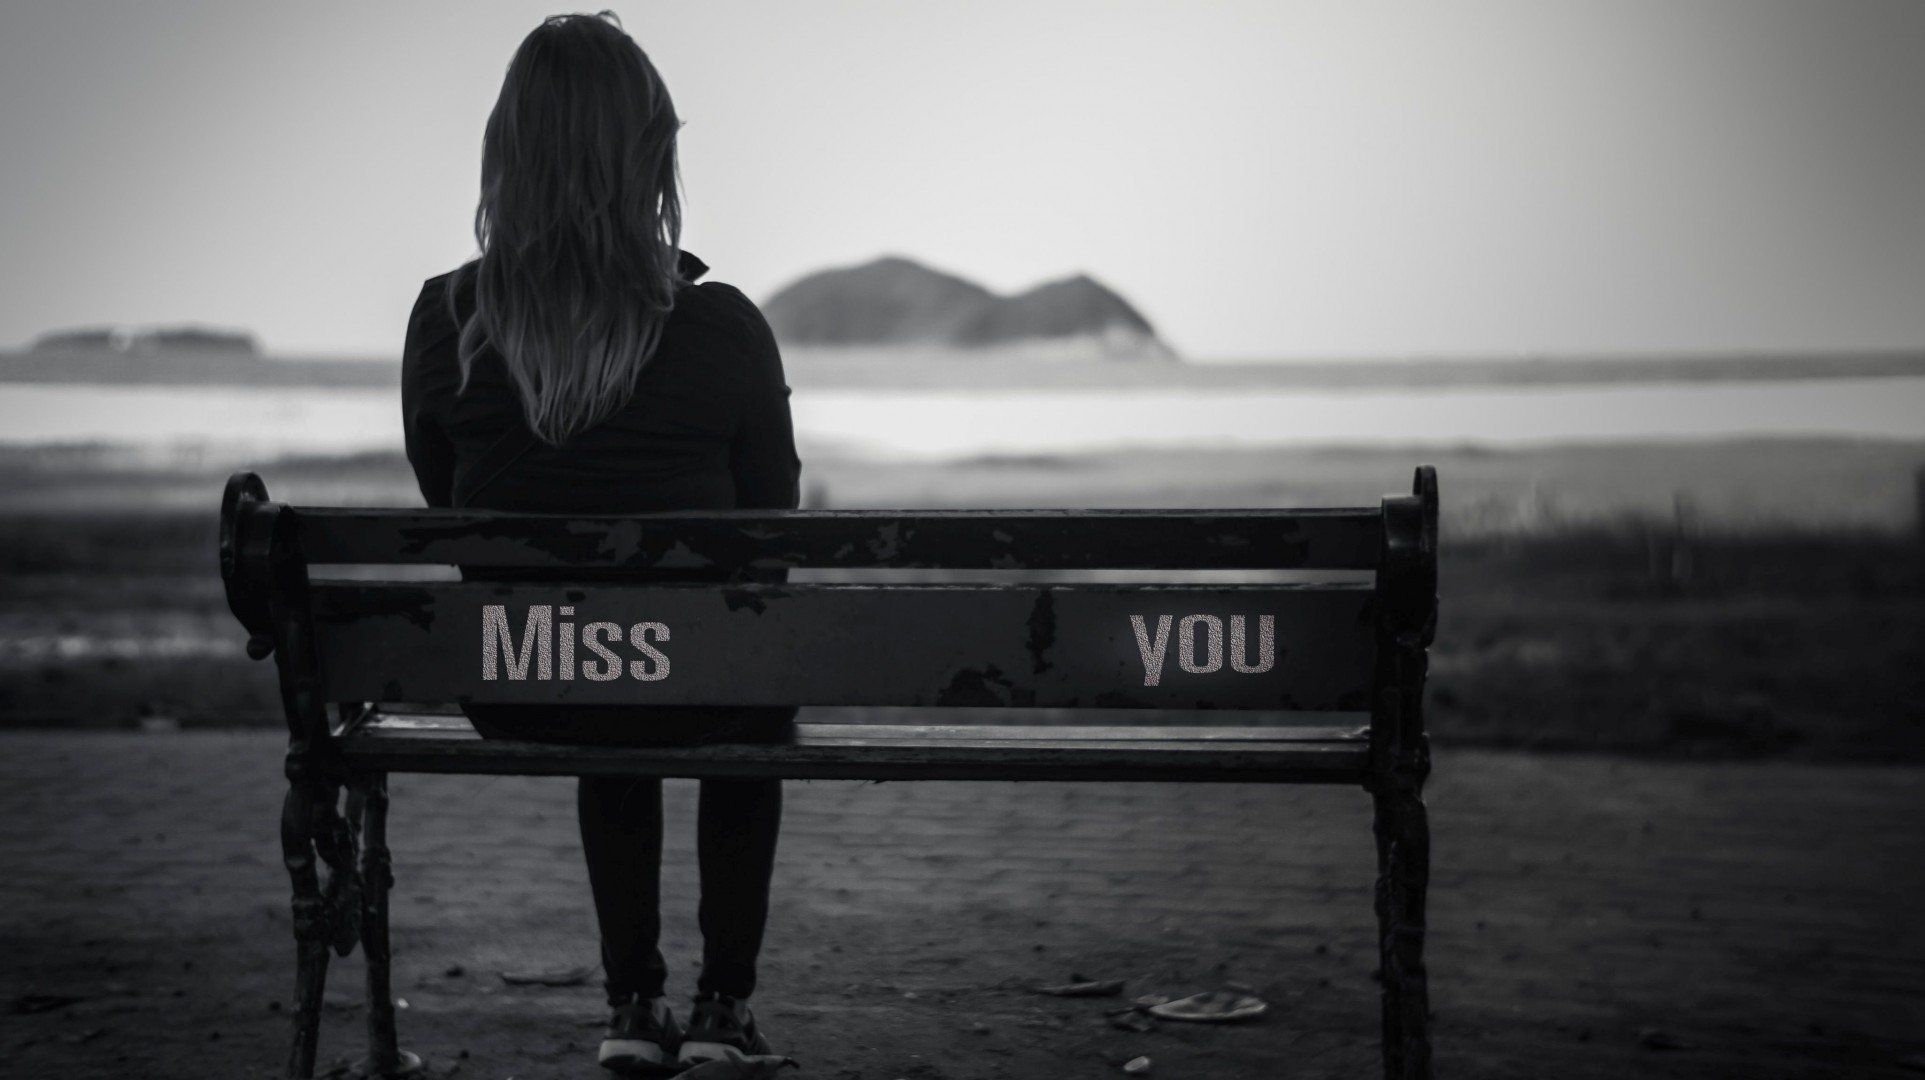 Full Screen Widescreen Shop Girl Mood Sadness Bench Black And White Longing Background A Woman Wallpaper Shop Loneliness Sad Blur Life Centre